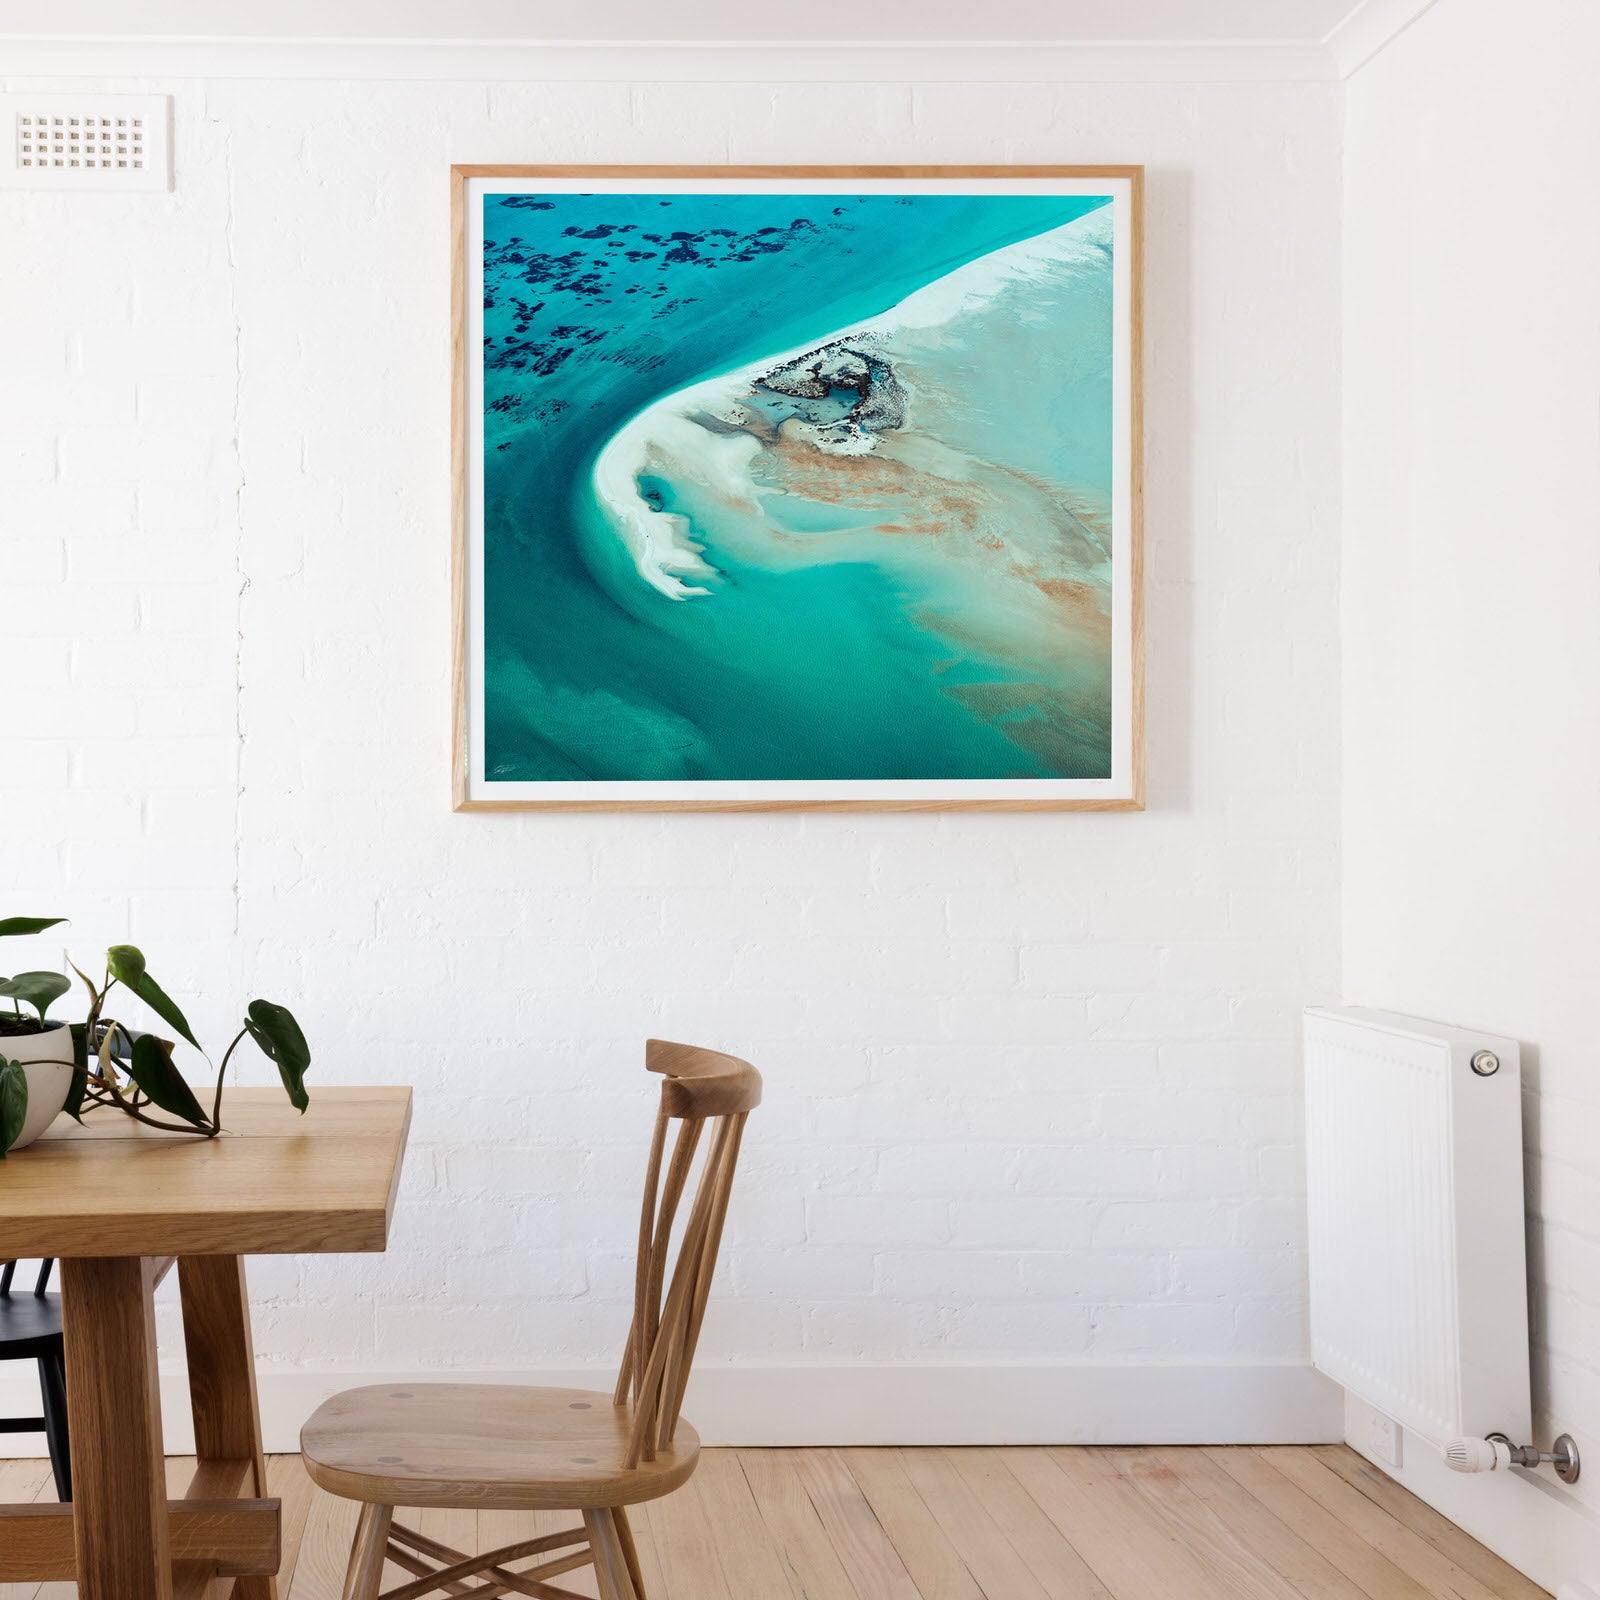 Framed Wall Art on wall with turquoise colours